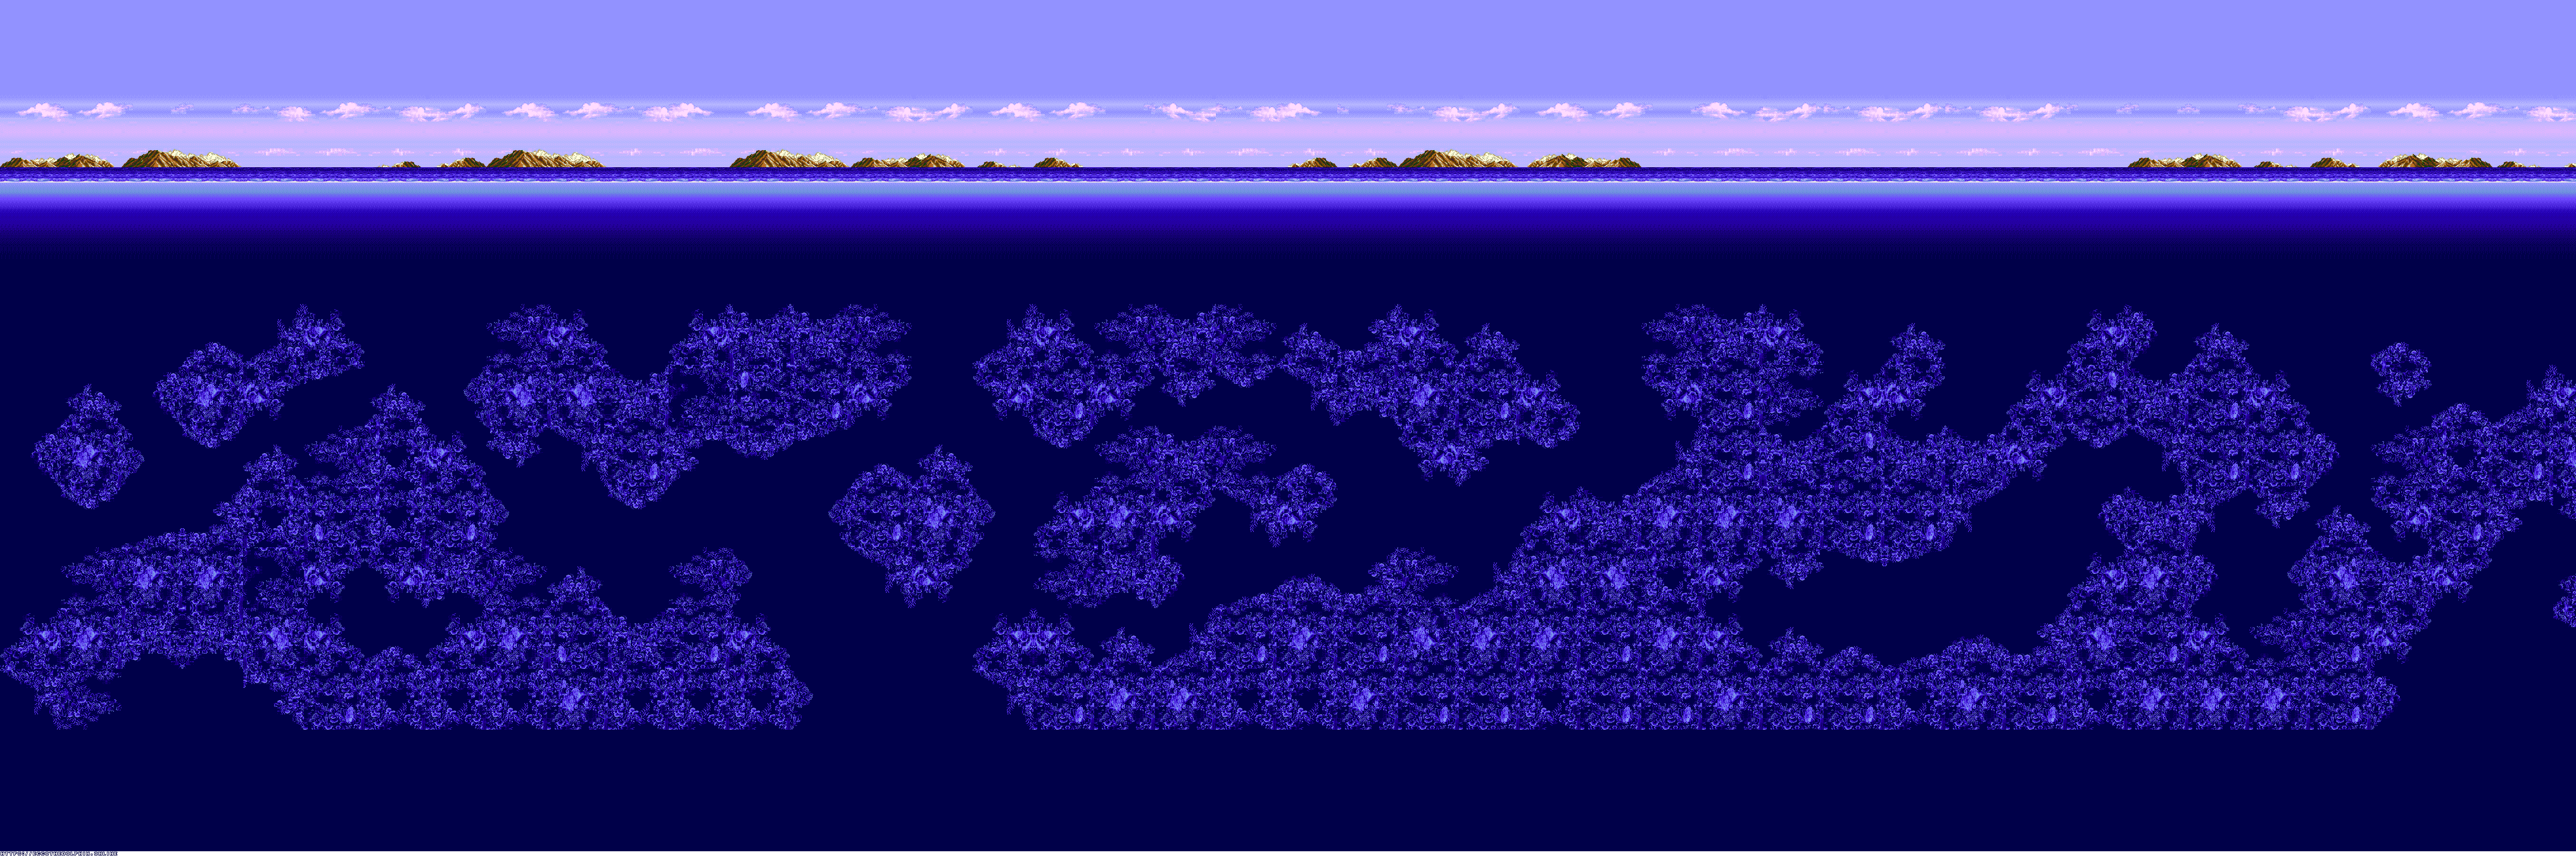 Ecco Jr. - The Lagoon of Songs (Background)